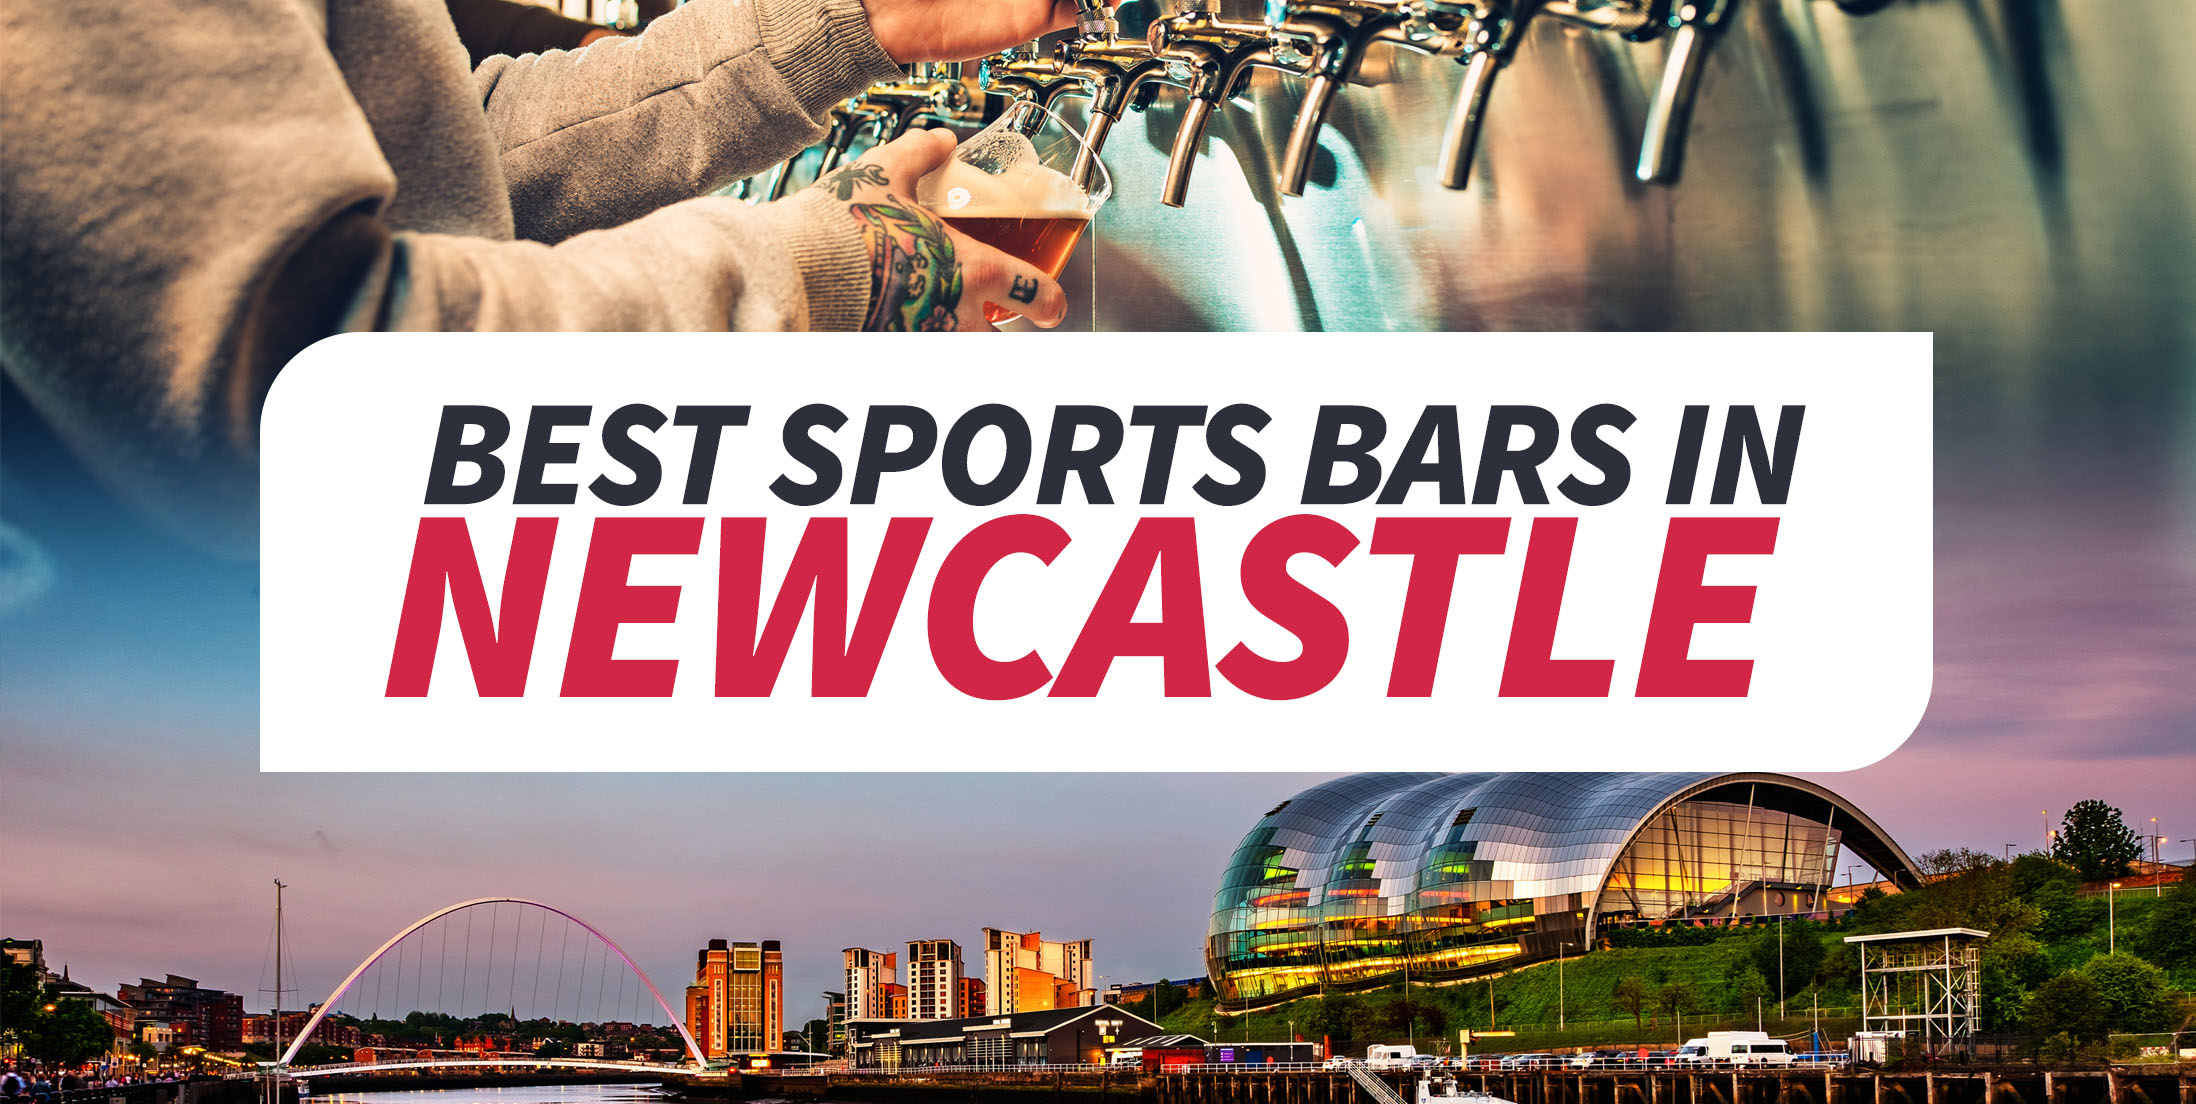 The Best Sports Bars in Newcastle